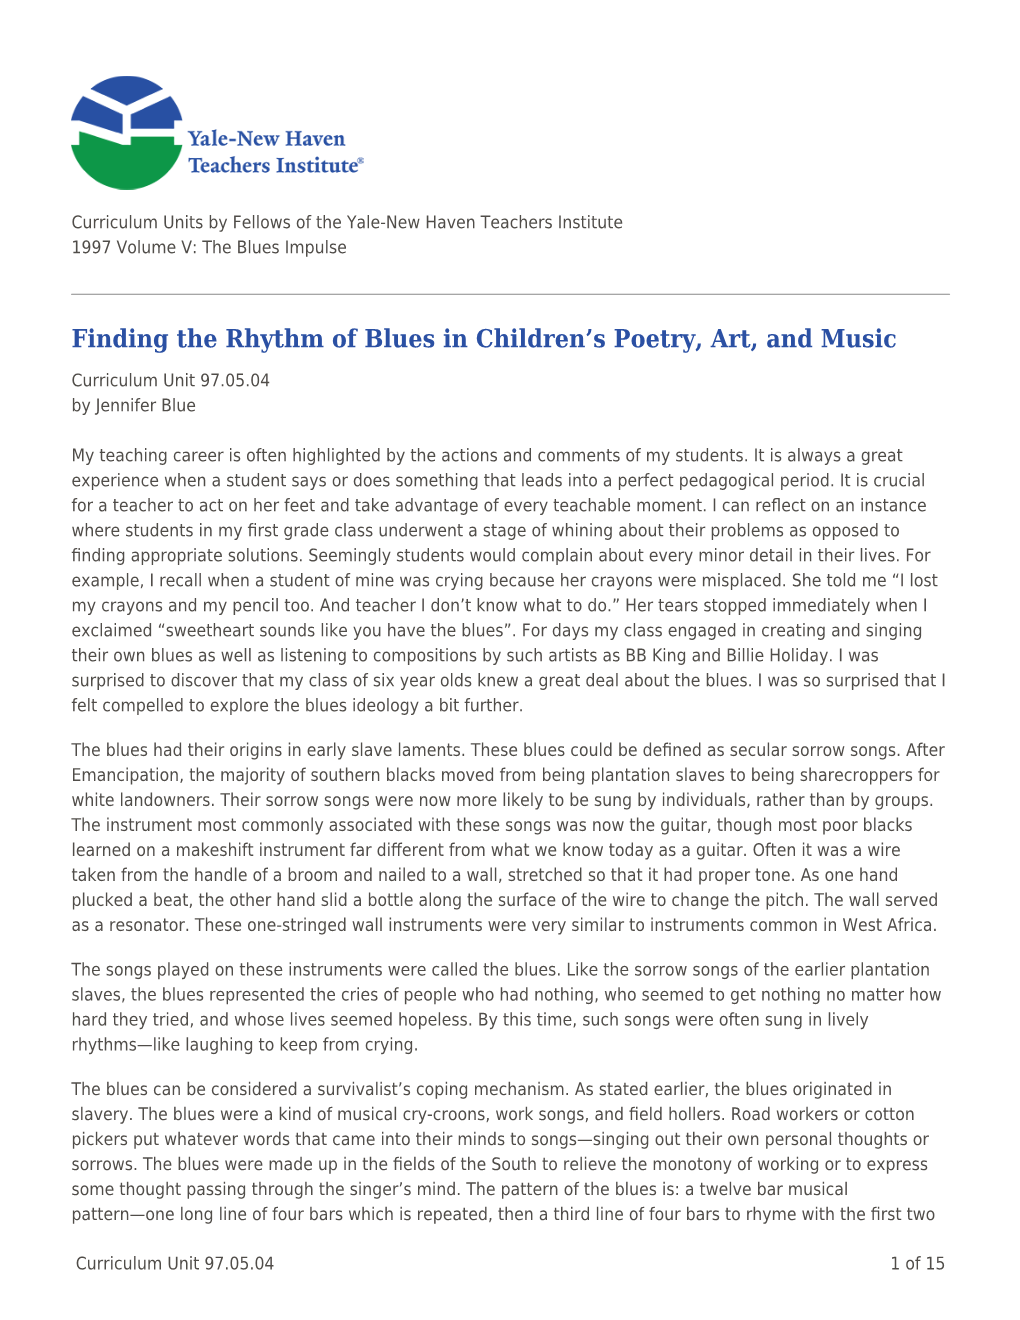 Finding the Rhythm of Blues in Children's Poetry, Art, and Music